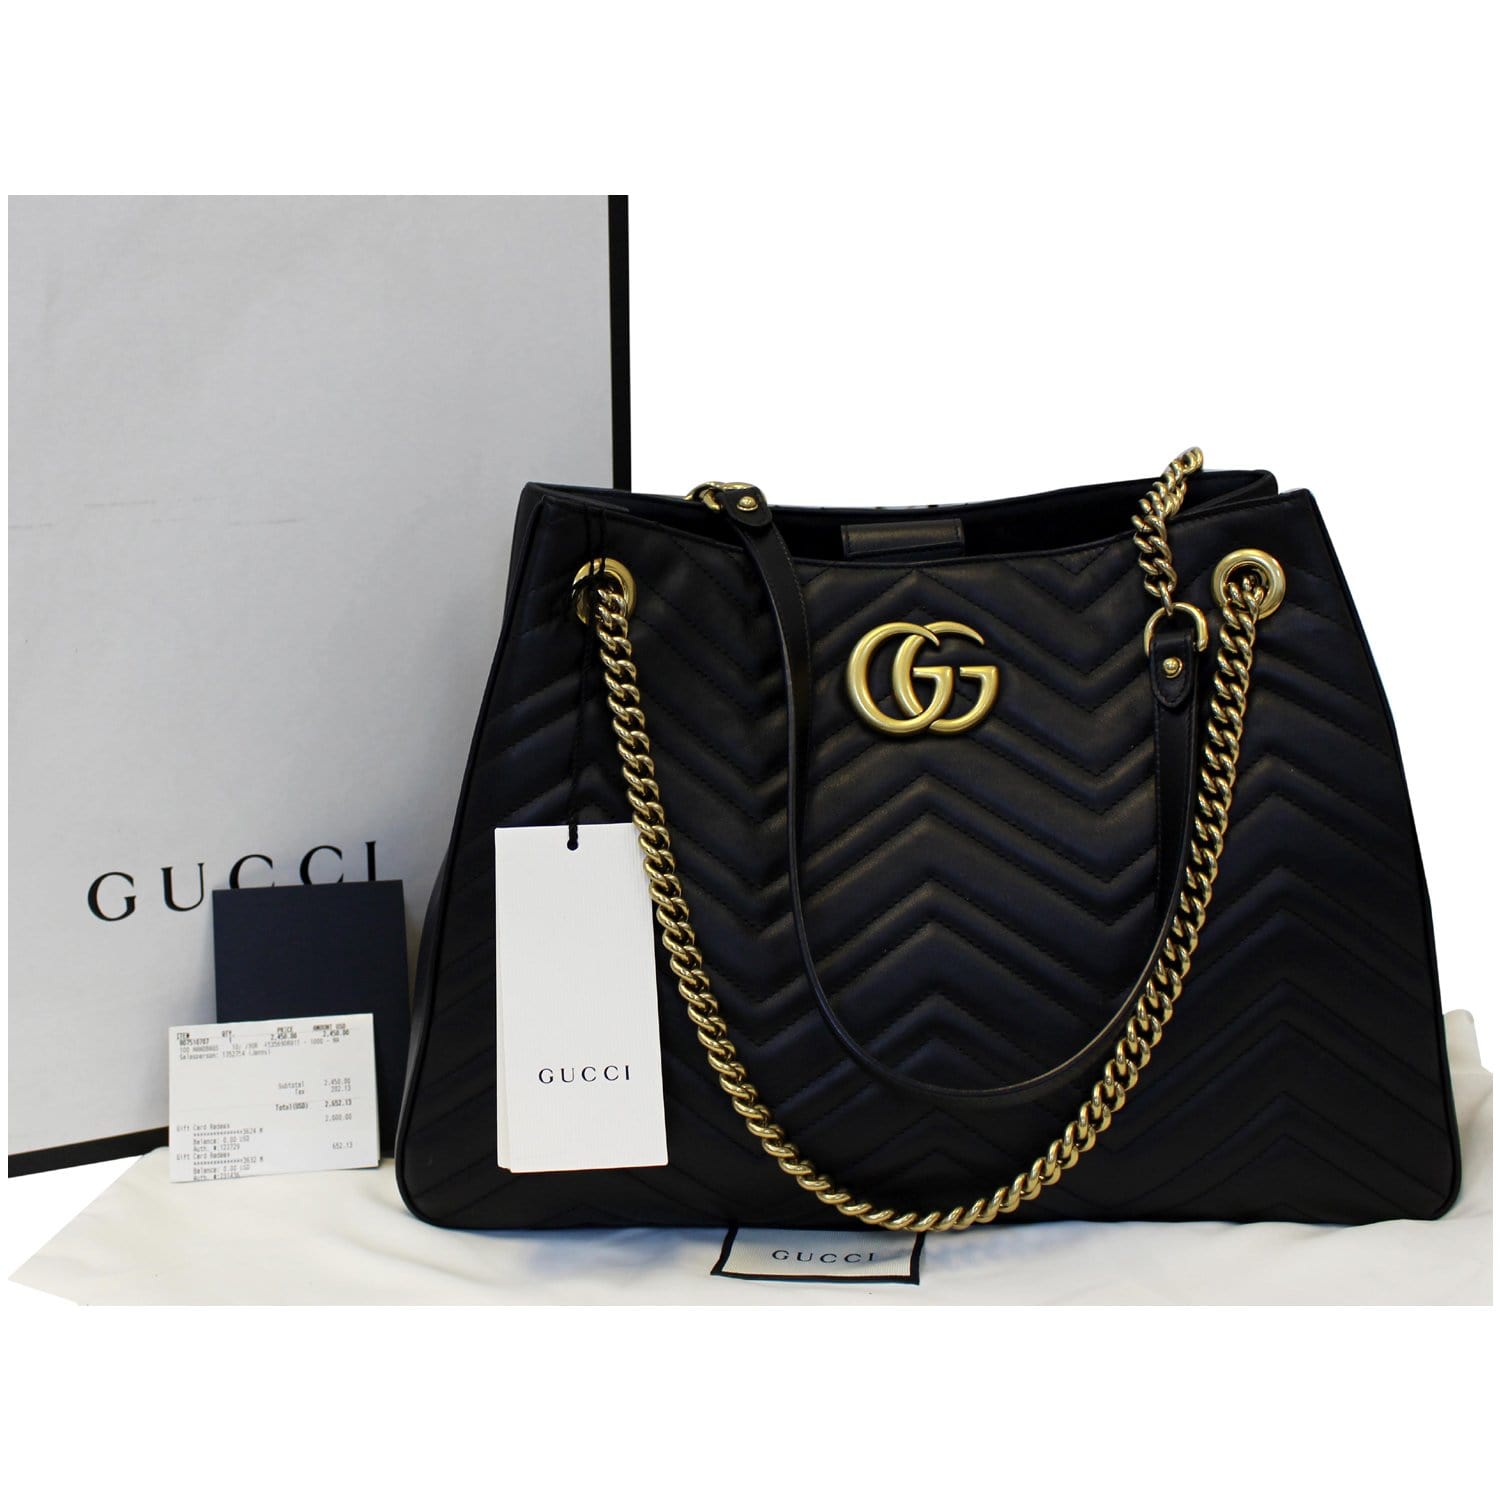 GUCCI GG Marmont quilted leather shoulder bag